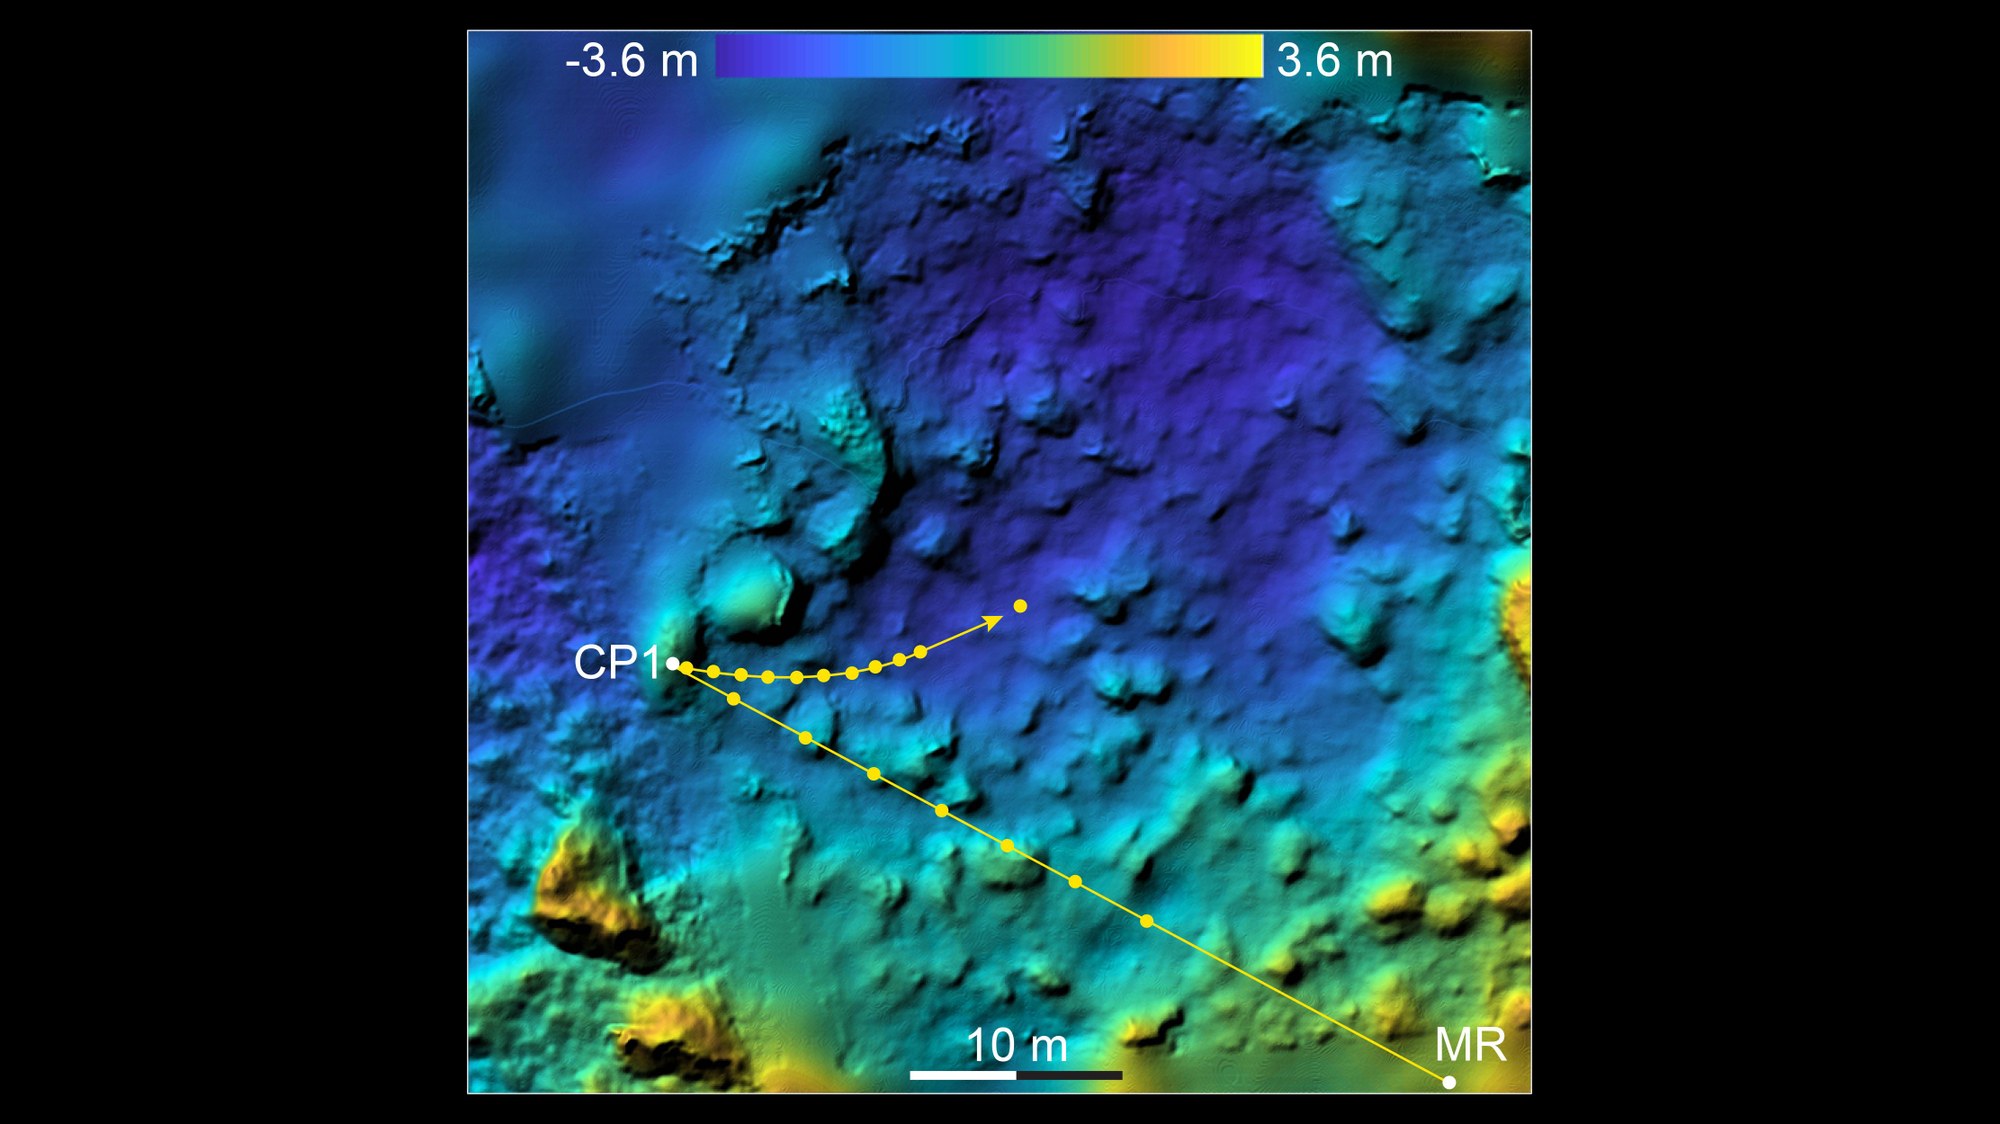 MASCOT's descent and path across the surface of Ryugu